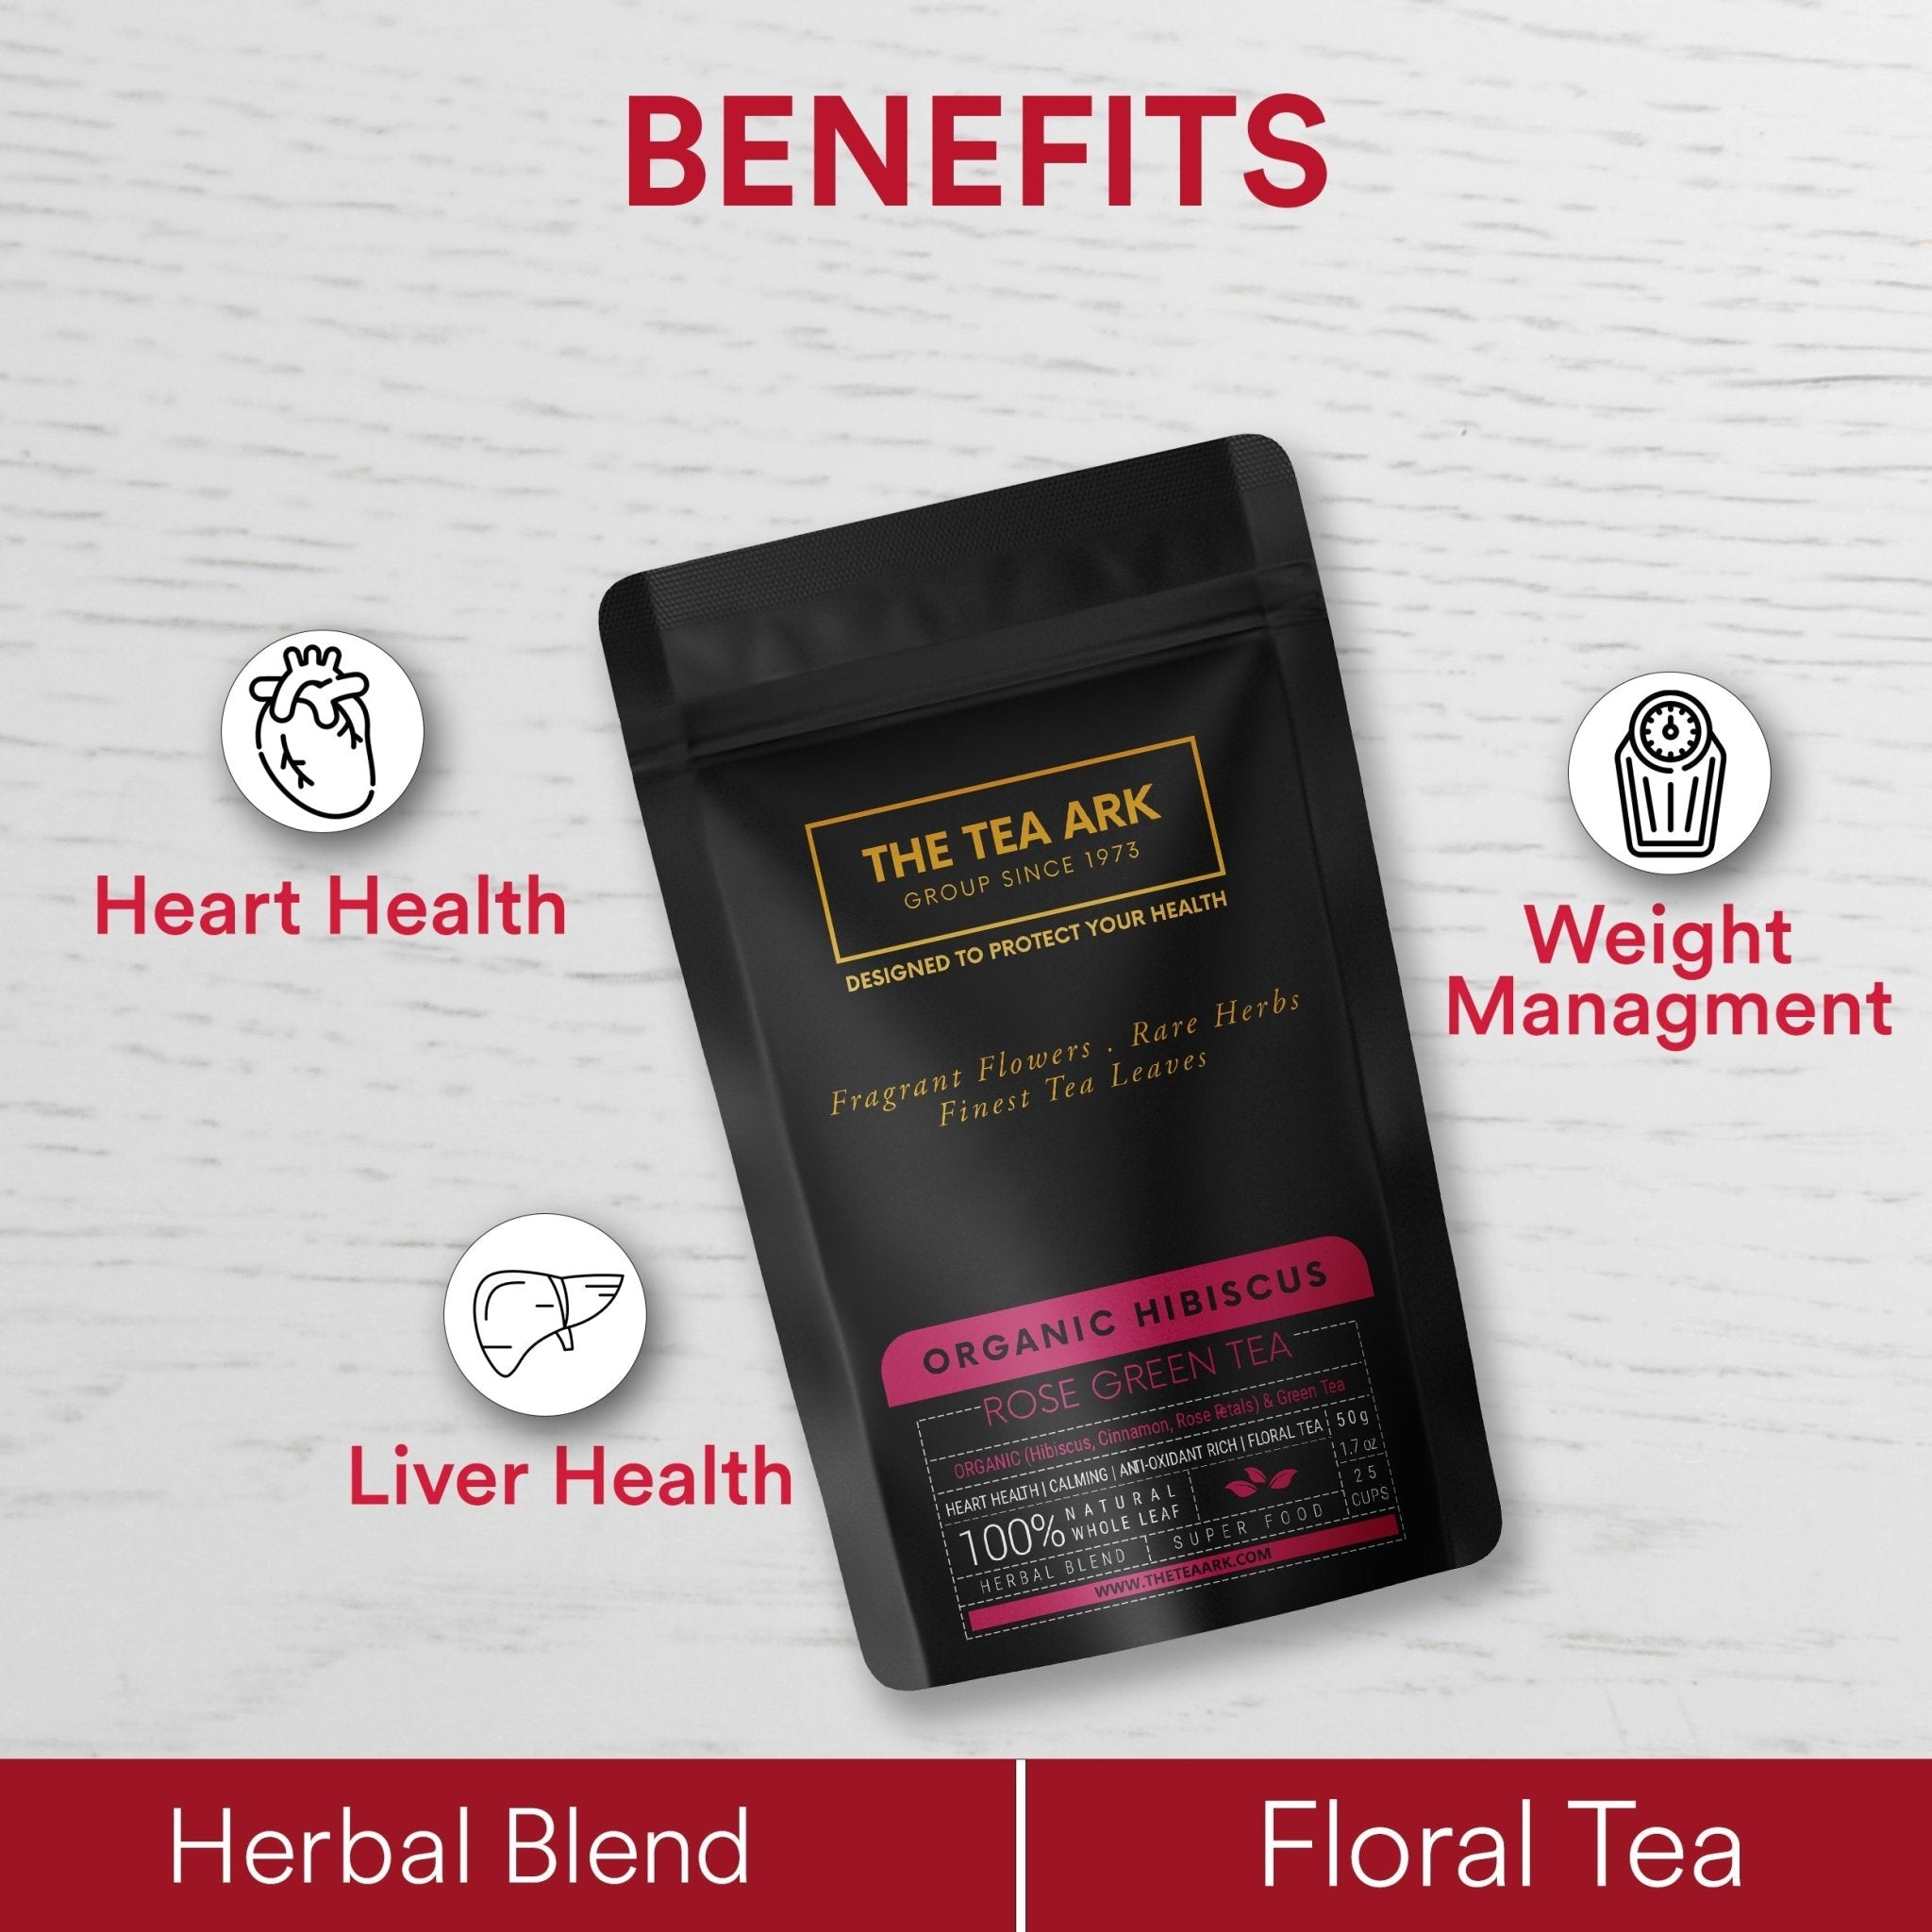 The Tea Ark Hibiscus Rose Green Tea, Powerful Antioxidant, Heart Health, Weight Management - Inlife Pharma Private Limited